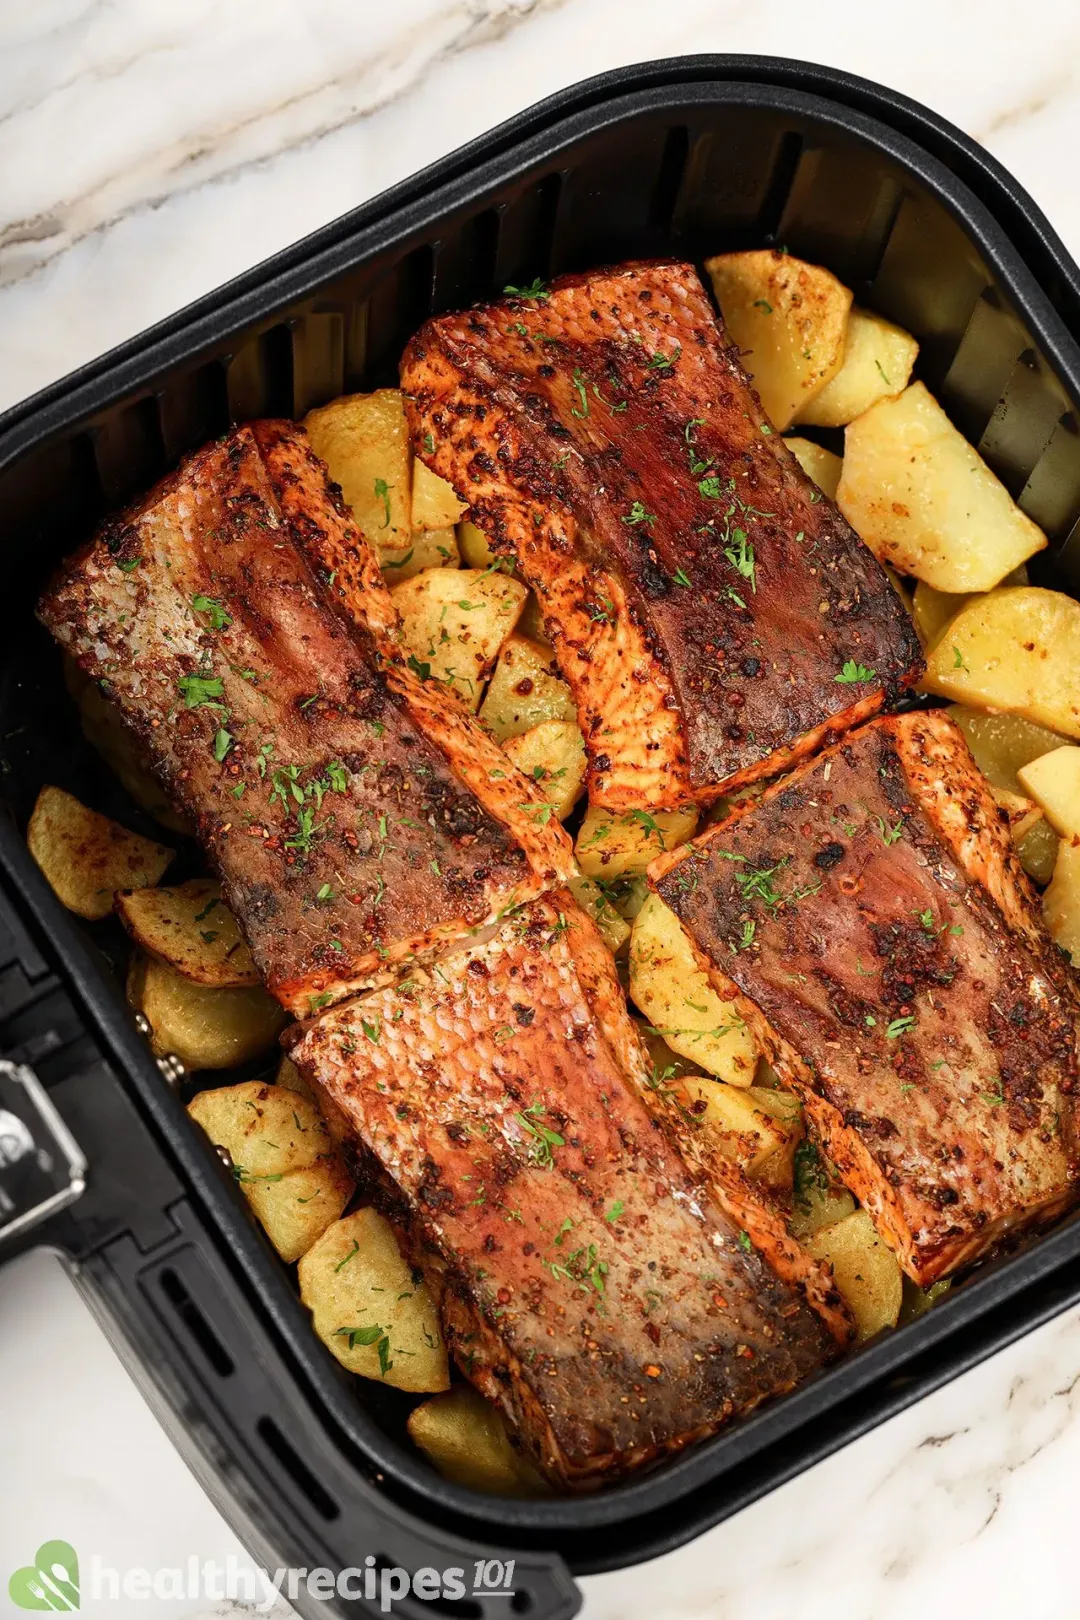 An air fryer basket containing four salmon fillets with brown skin and surrounded by large potato cubes